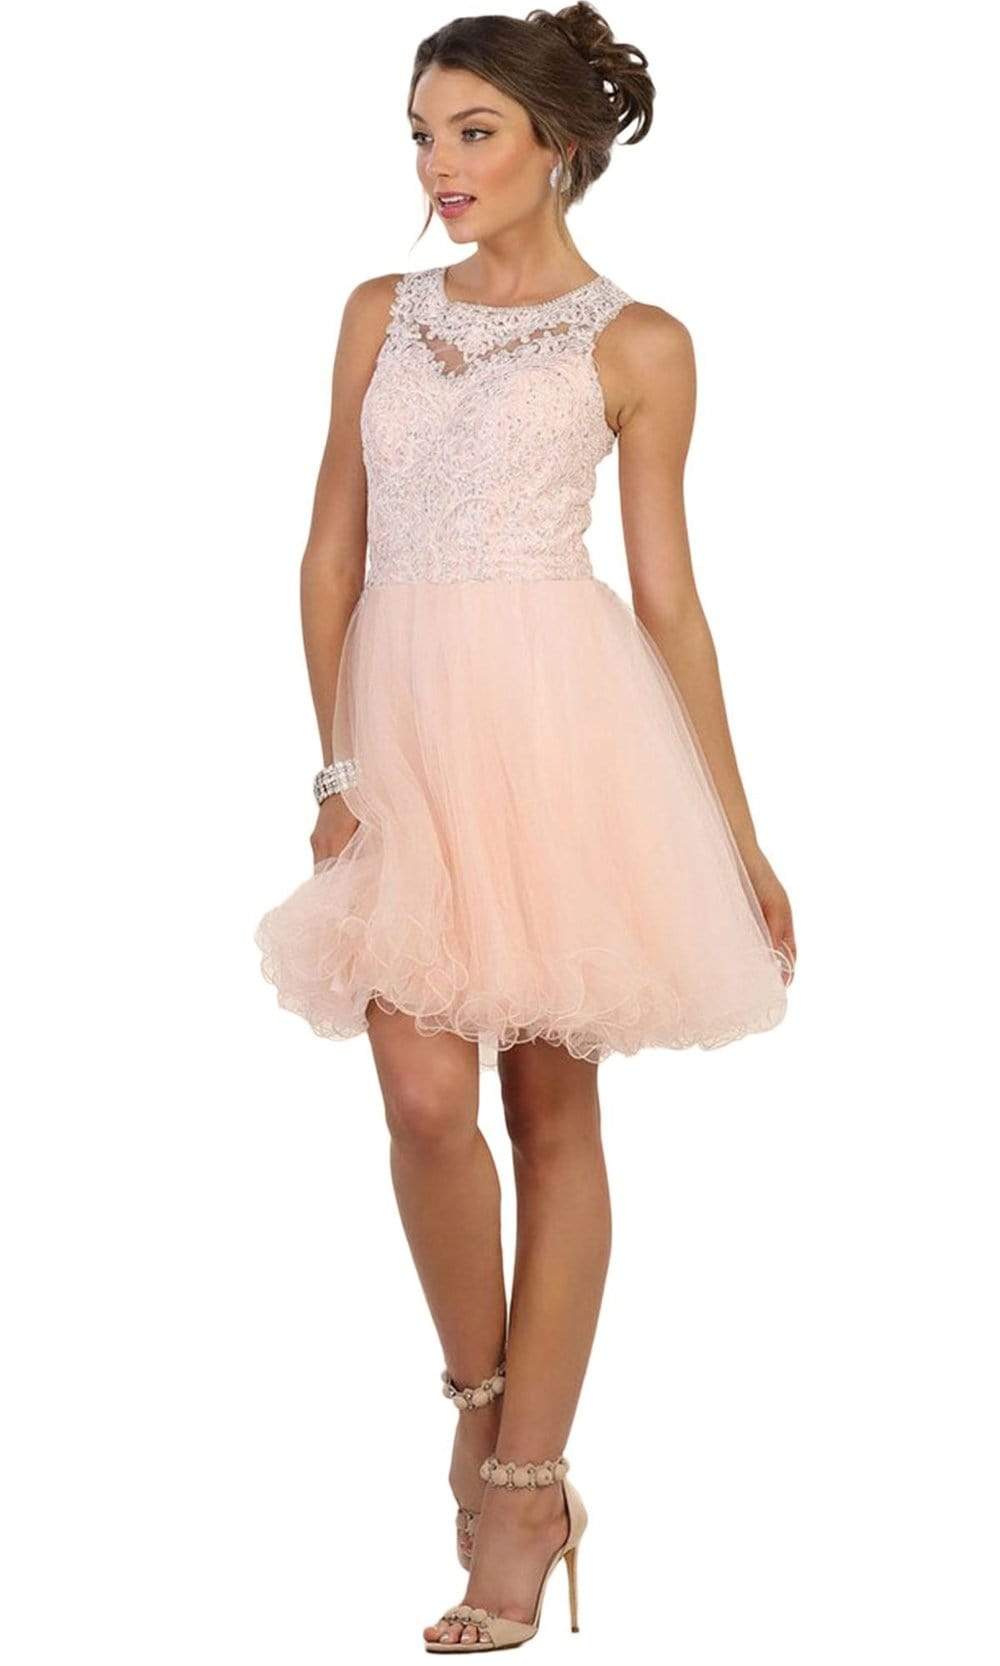 May Queen - Embellished Jewel A-line Homecoming Dress
